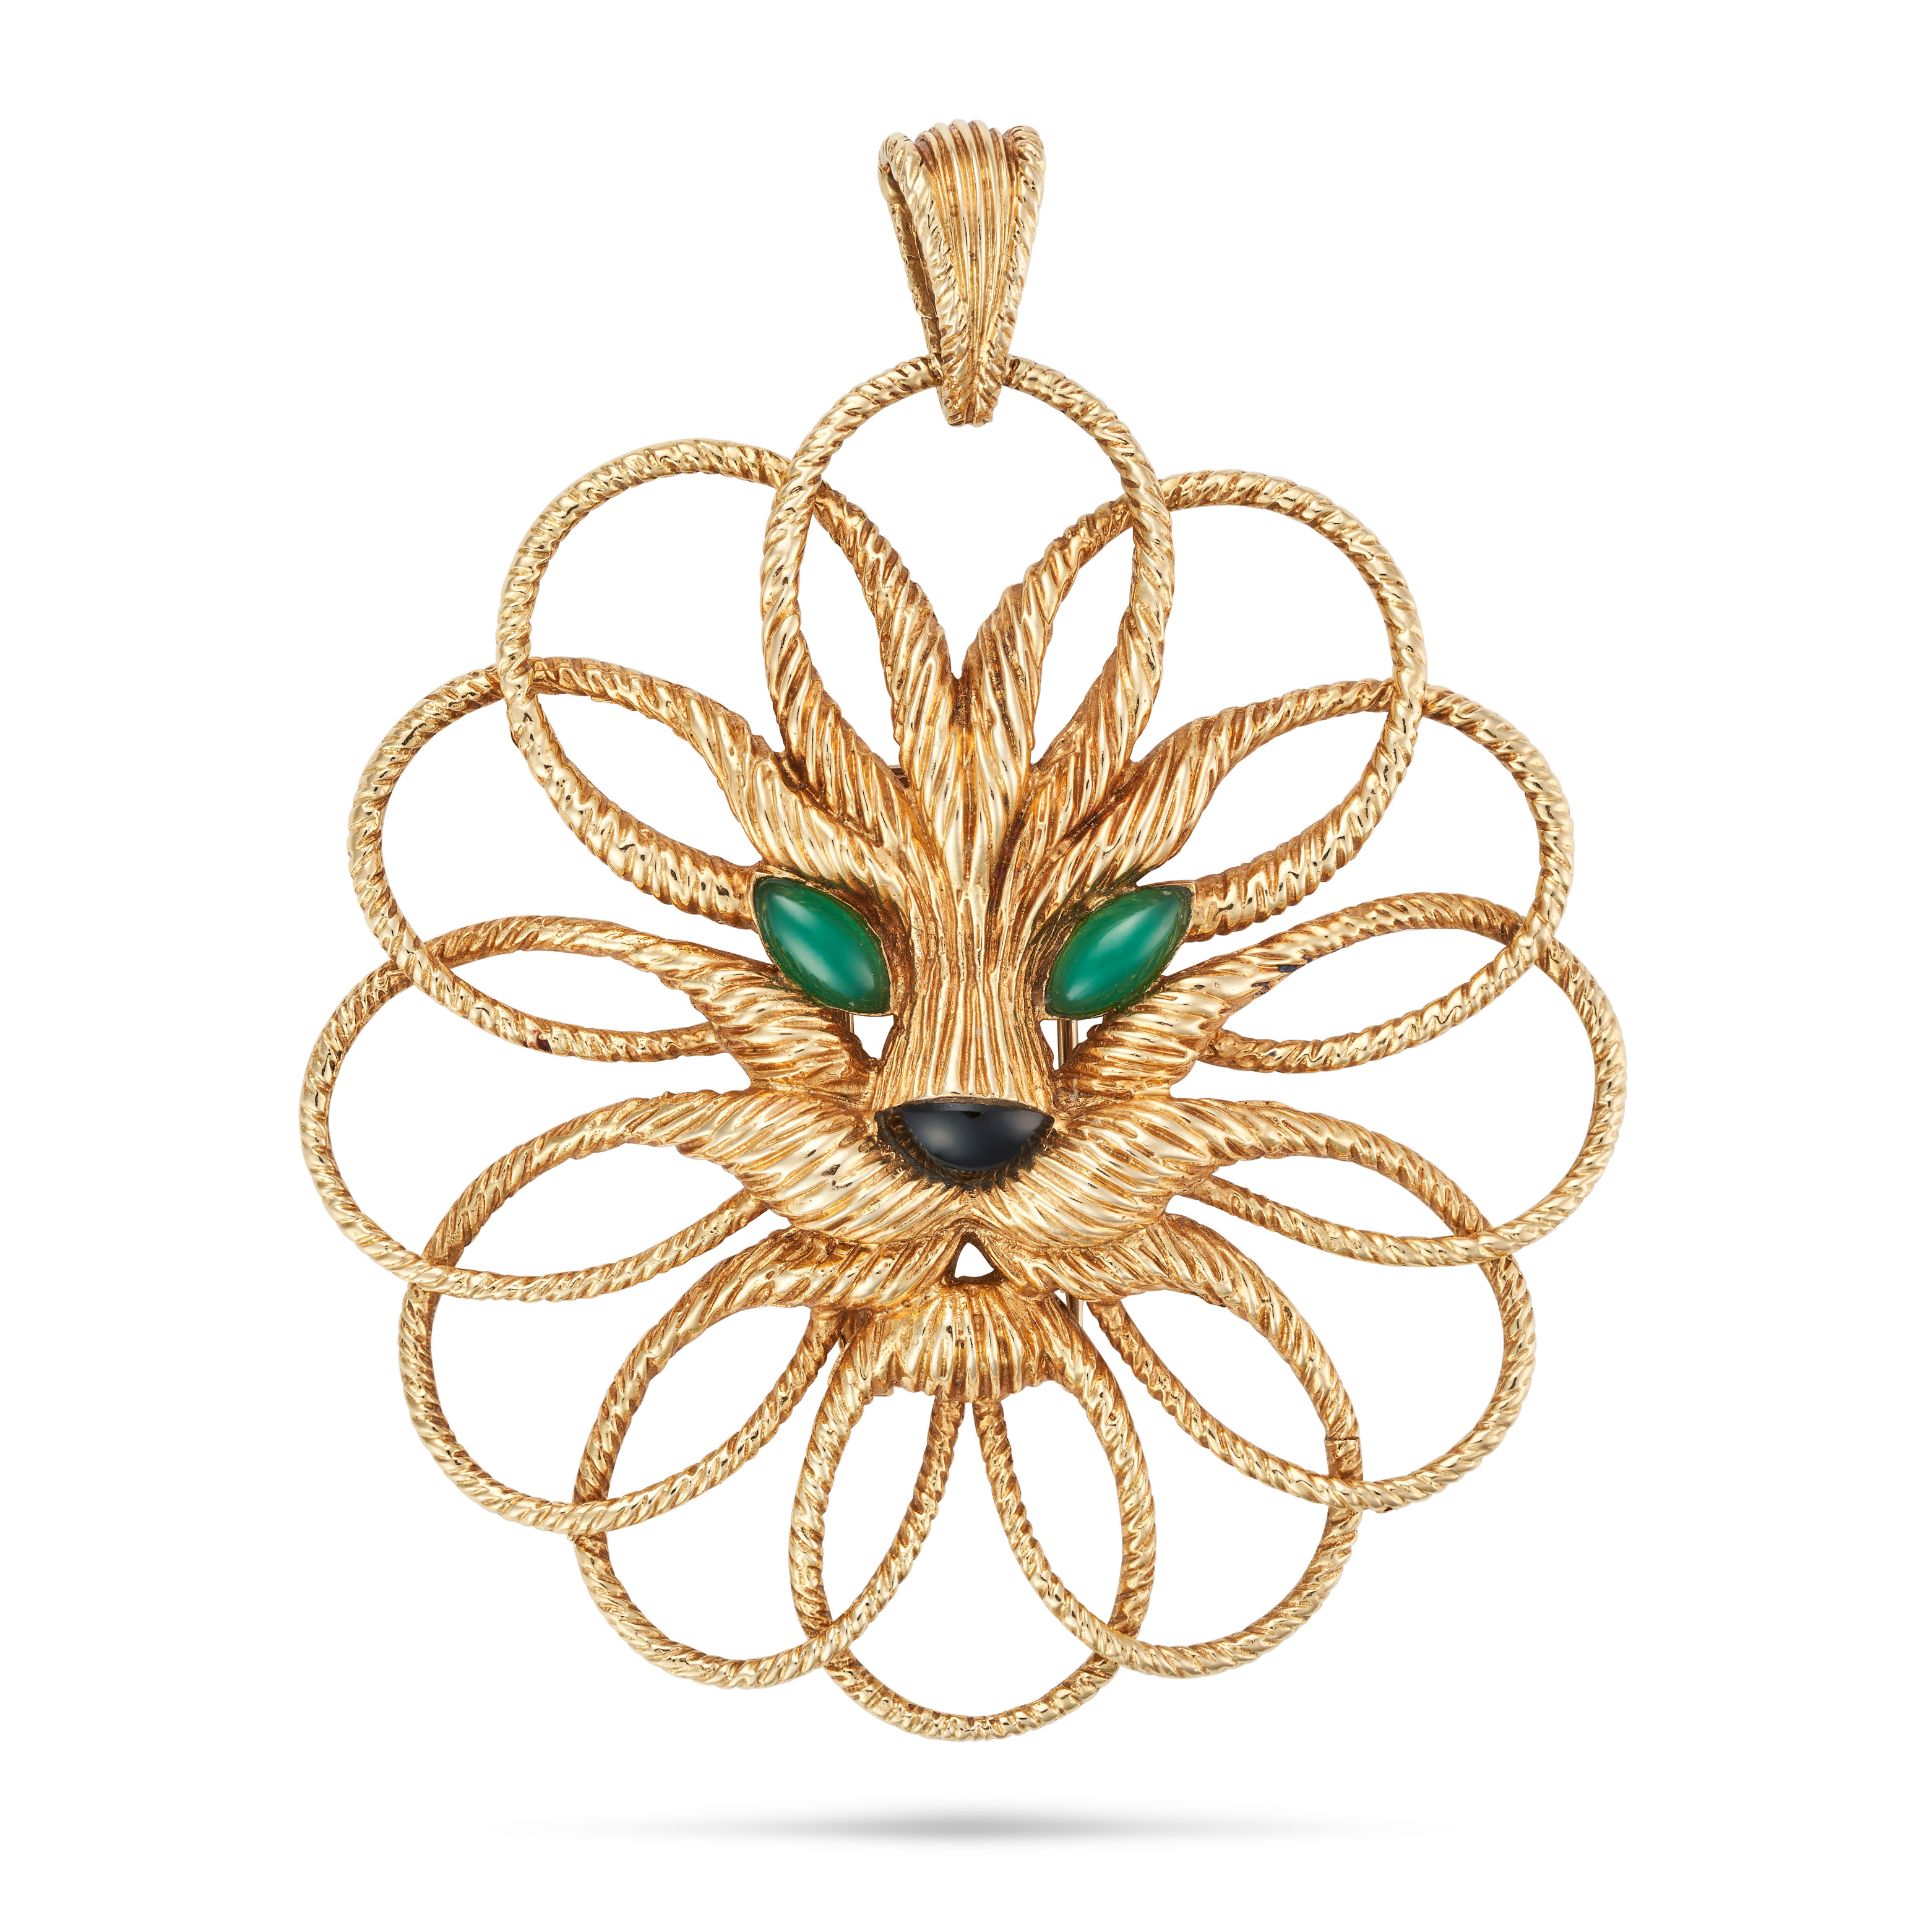 VAN CLEEF & ARPELS, A CHRYSOPRASE AND ONYX LION BROOCH / PENDANT in 18ct yellow gold, the openwor...